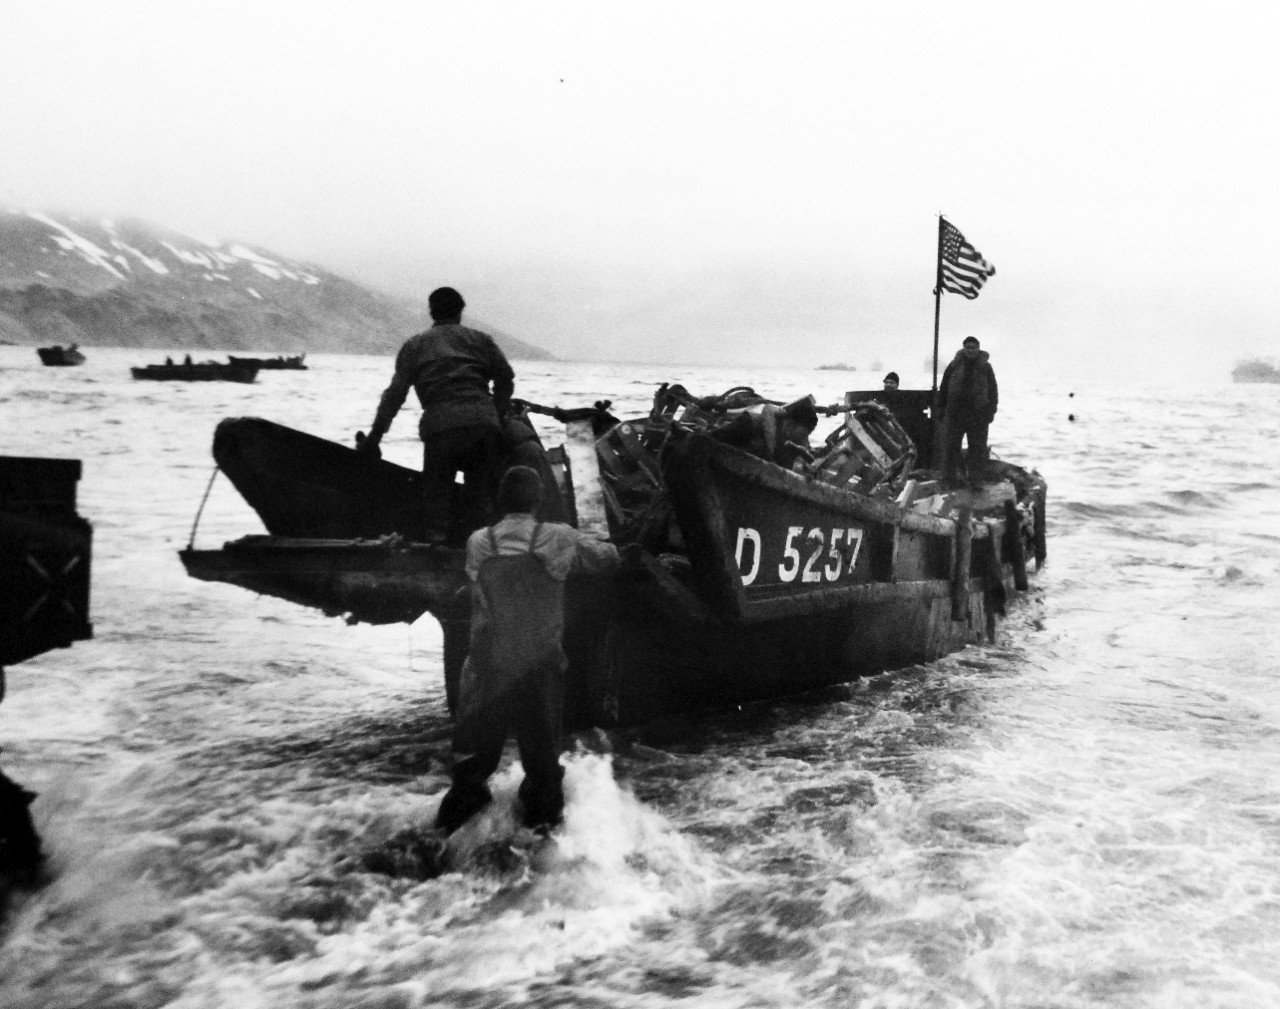 LC-Lot-803-30:  Aleutian Islands Campaign, June 1942 - August 1943.   Allied Landing on Attu Island, May 11 1943.   Old Glory Waves From a Japanese Landing Boat.  Americans bring ashore a captured Japanese landing boat at Attu.  The American flag is prominently displayed.  The scene was the beach at Massacre Bay. U.S. Navy photograph, released May 27, 1943.   Photographed through Mylar sleeve.  Courtesy of the Library of Congress.  (2015/11/06).